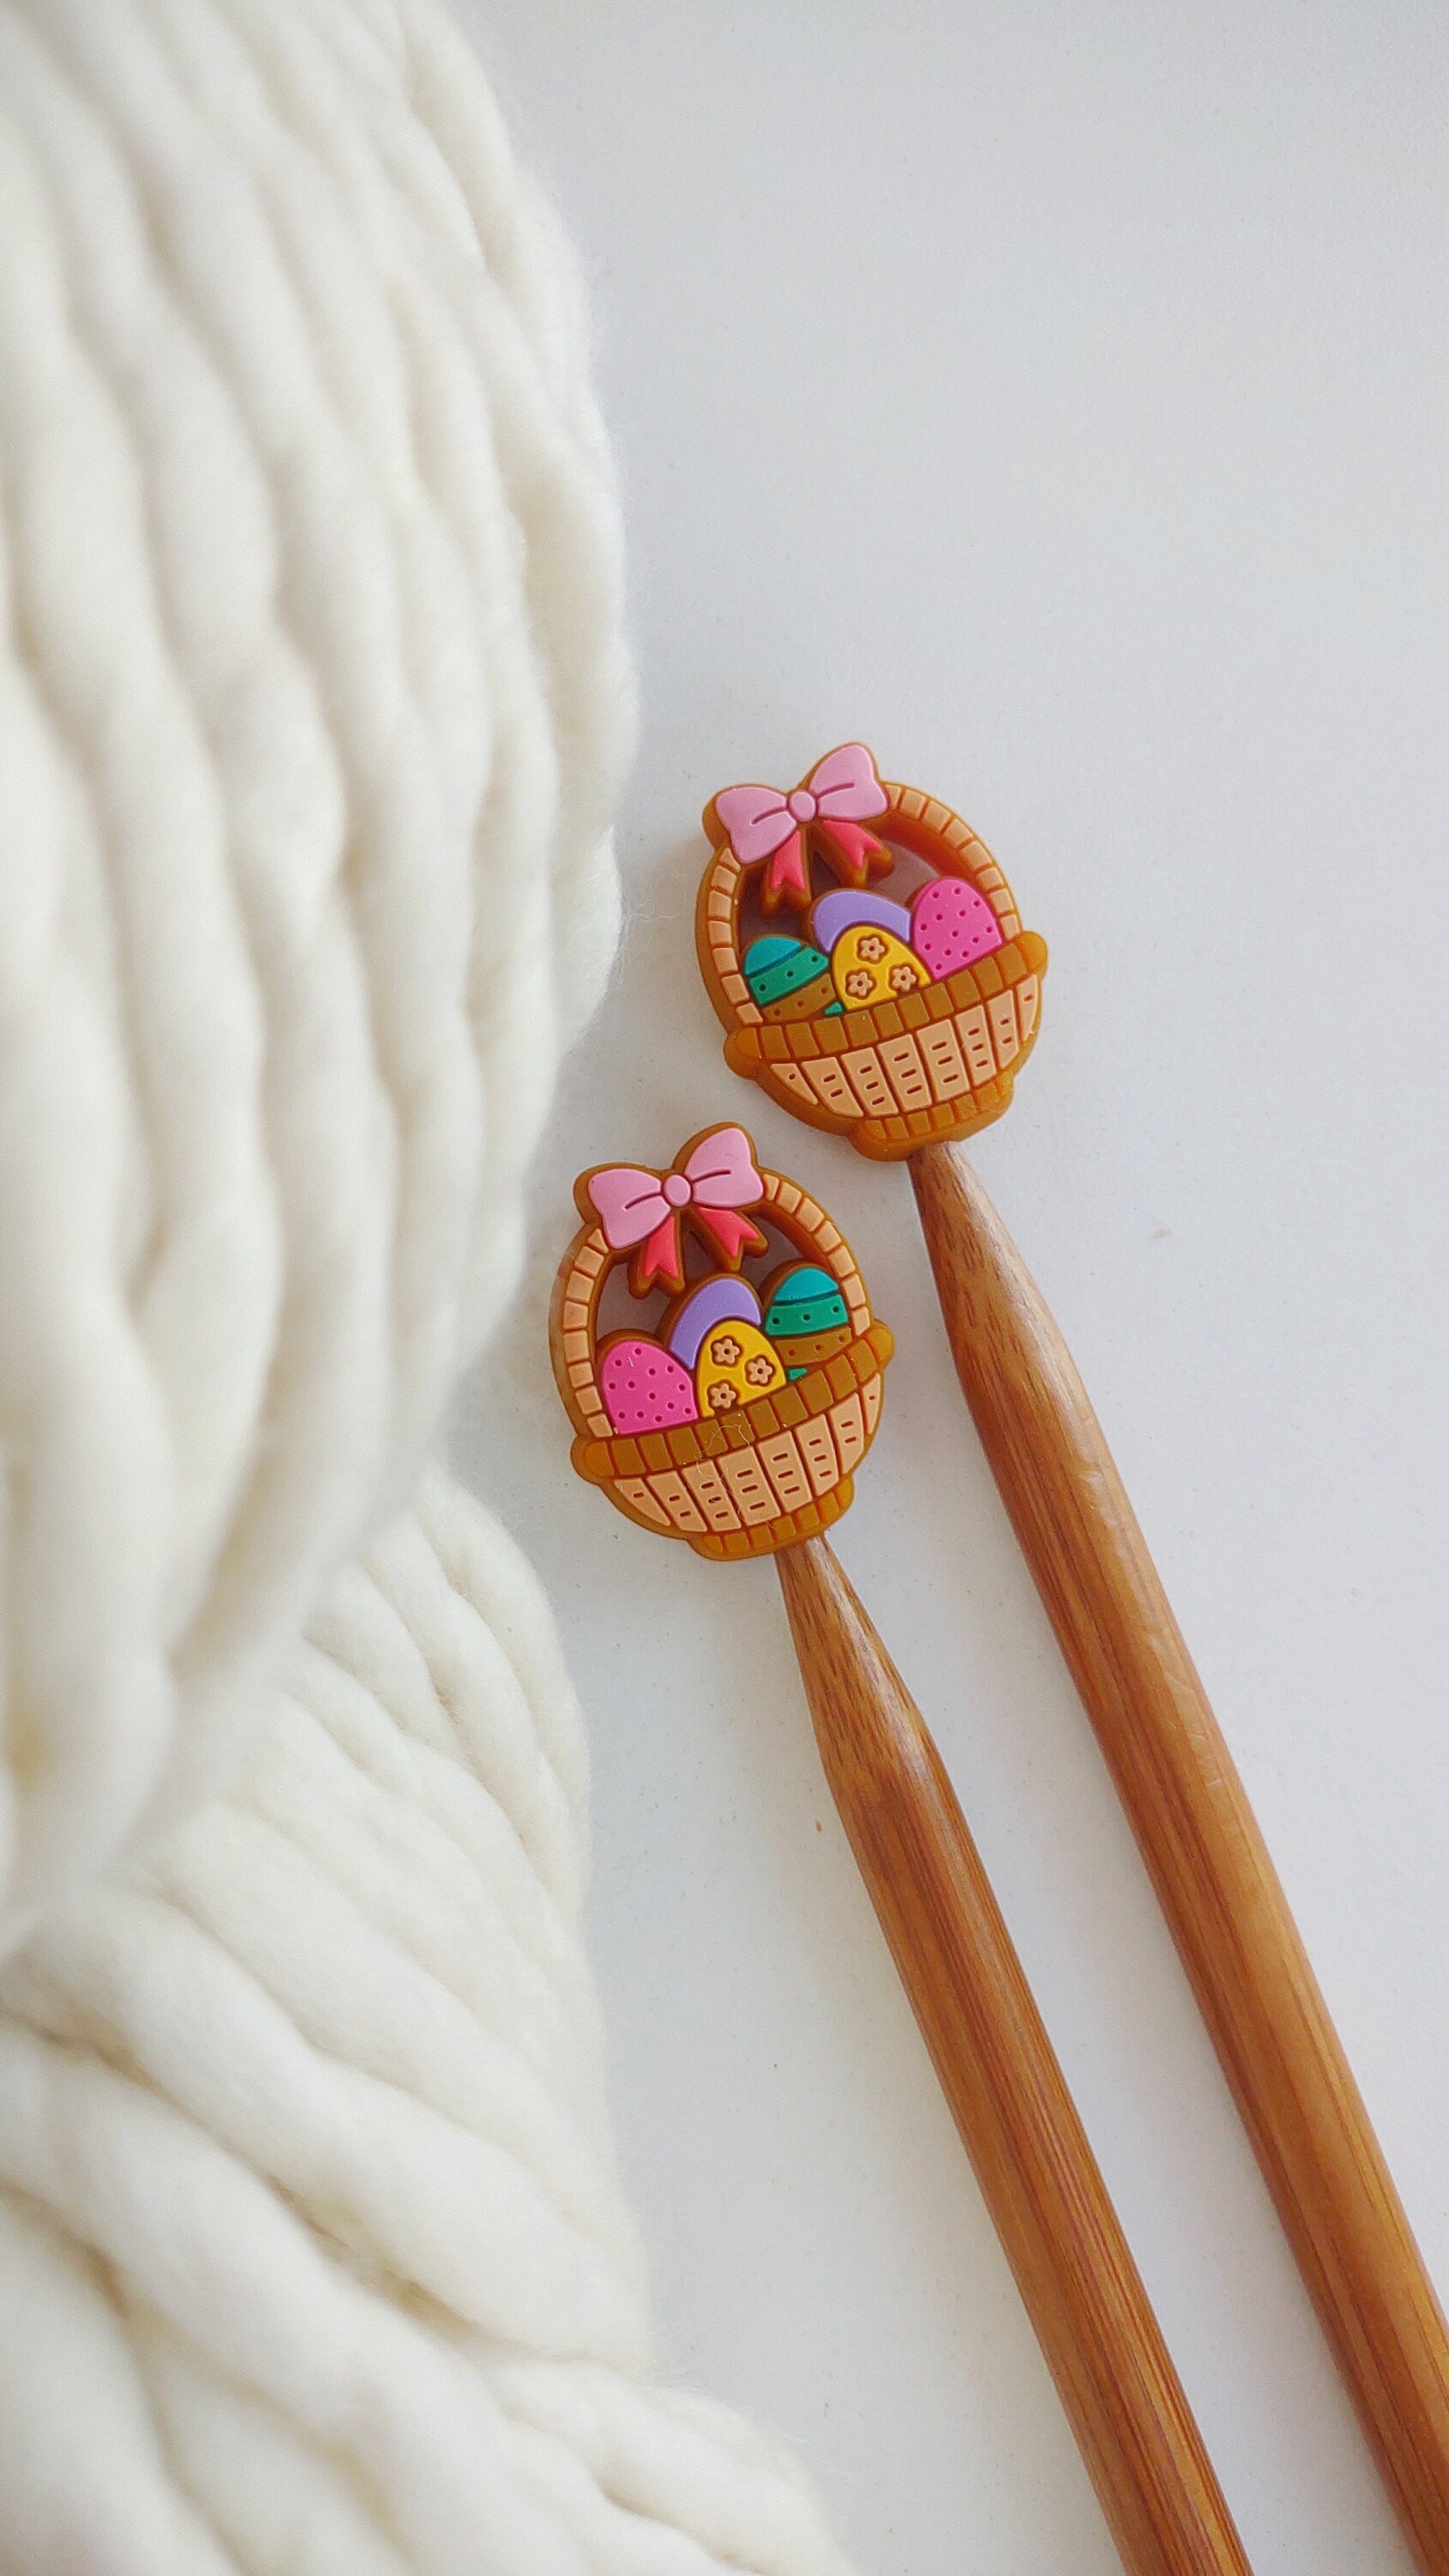 Spring Easter Egg Basket Knitting Needle Stitch Stoppers. Needle Protector. Knitting Needle Stoppers. Notions, Accessories, Supplies, Tools